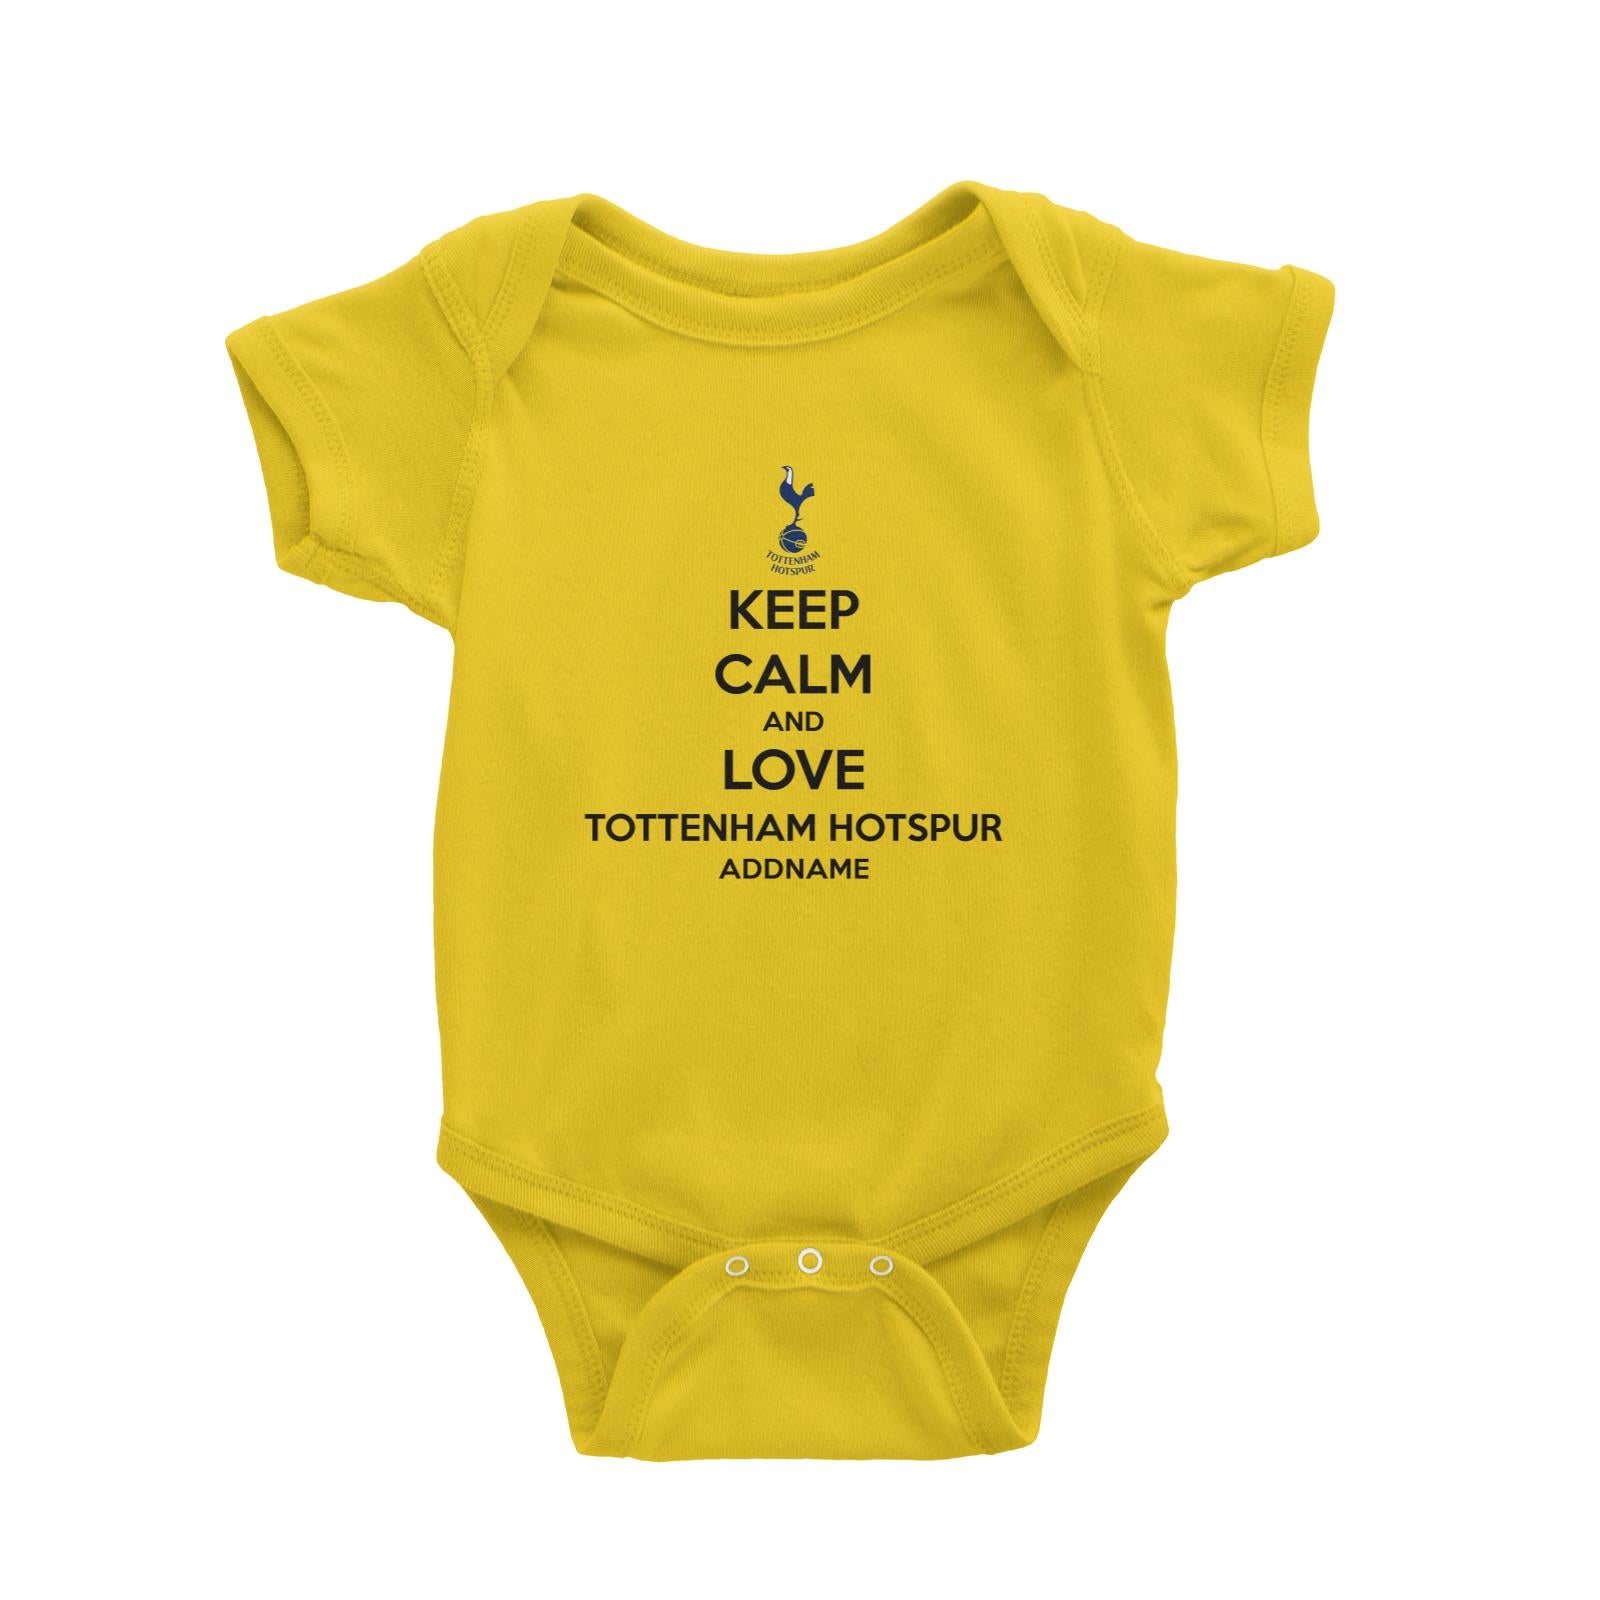 Tottenham Hotspur Football Keep Calm And Love Series Addname Baby Romper